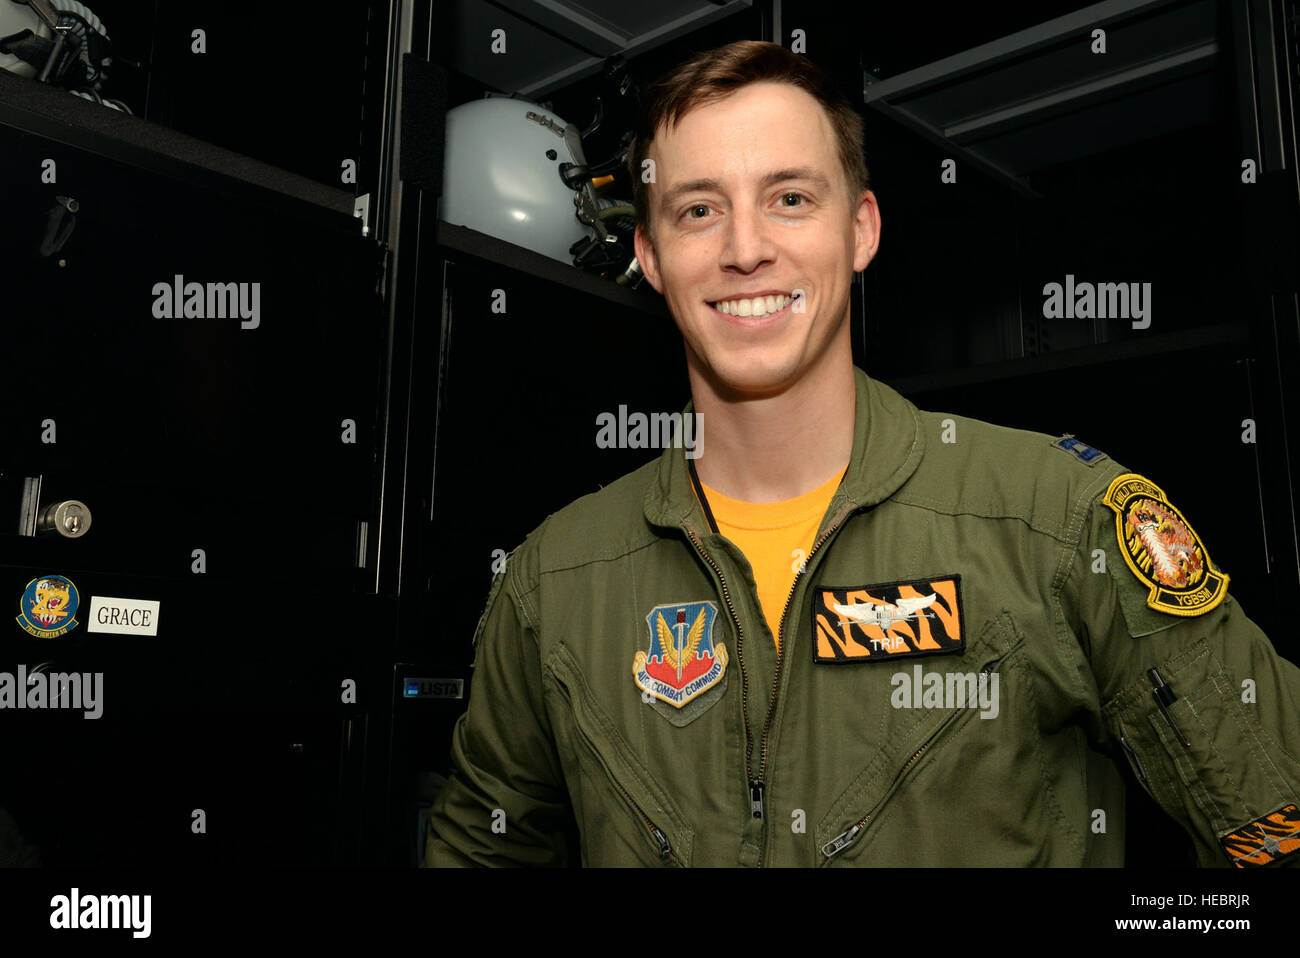 U.S. Air Force Capt. Stephen Grace, 79th Fighter Squadron fighter pilot, stands by his locker in the 79th FS locker room at Shaw Air Force Base, S.C., Oct. 3, 2014. Grace, an Air Force Academy, Colorado Springs, Colo., graduate, attributes his ongoing success in the Air Force to his competitiveness developed from his swimming career. (U.S. Air Force photo by Airman 1st Class Jonathan Bass/Released) Stock Photo